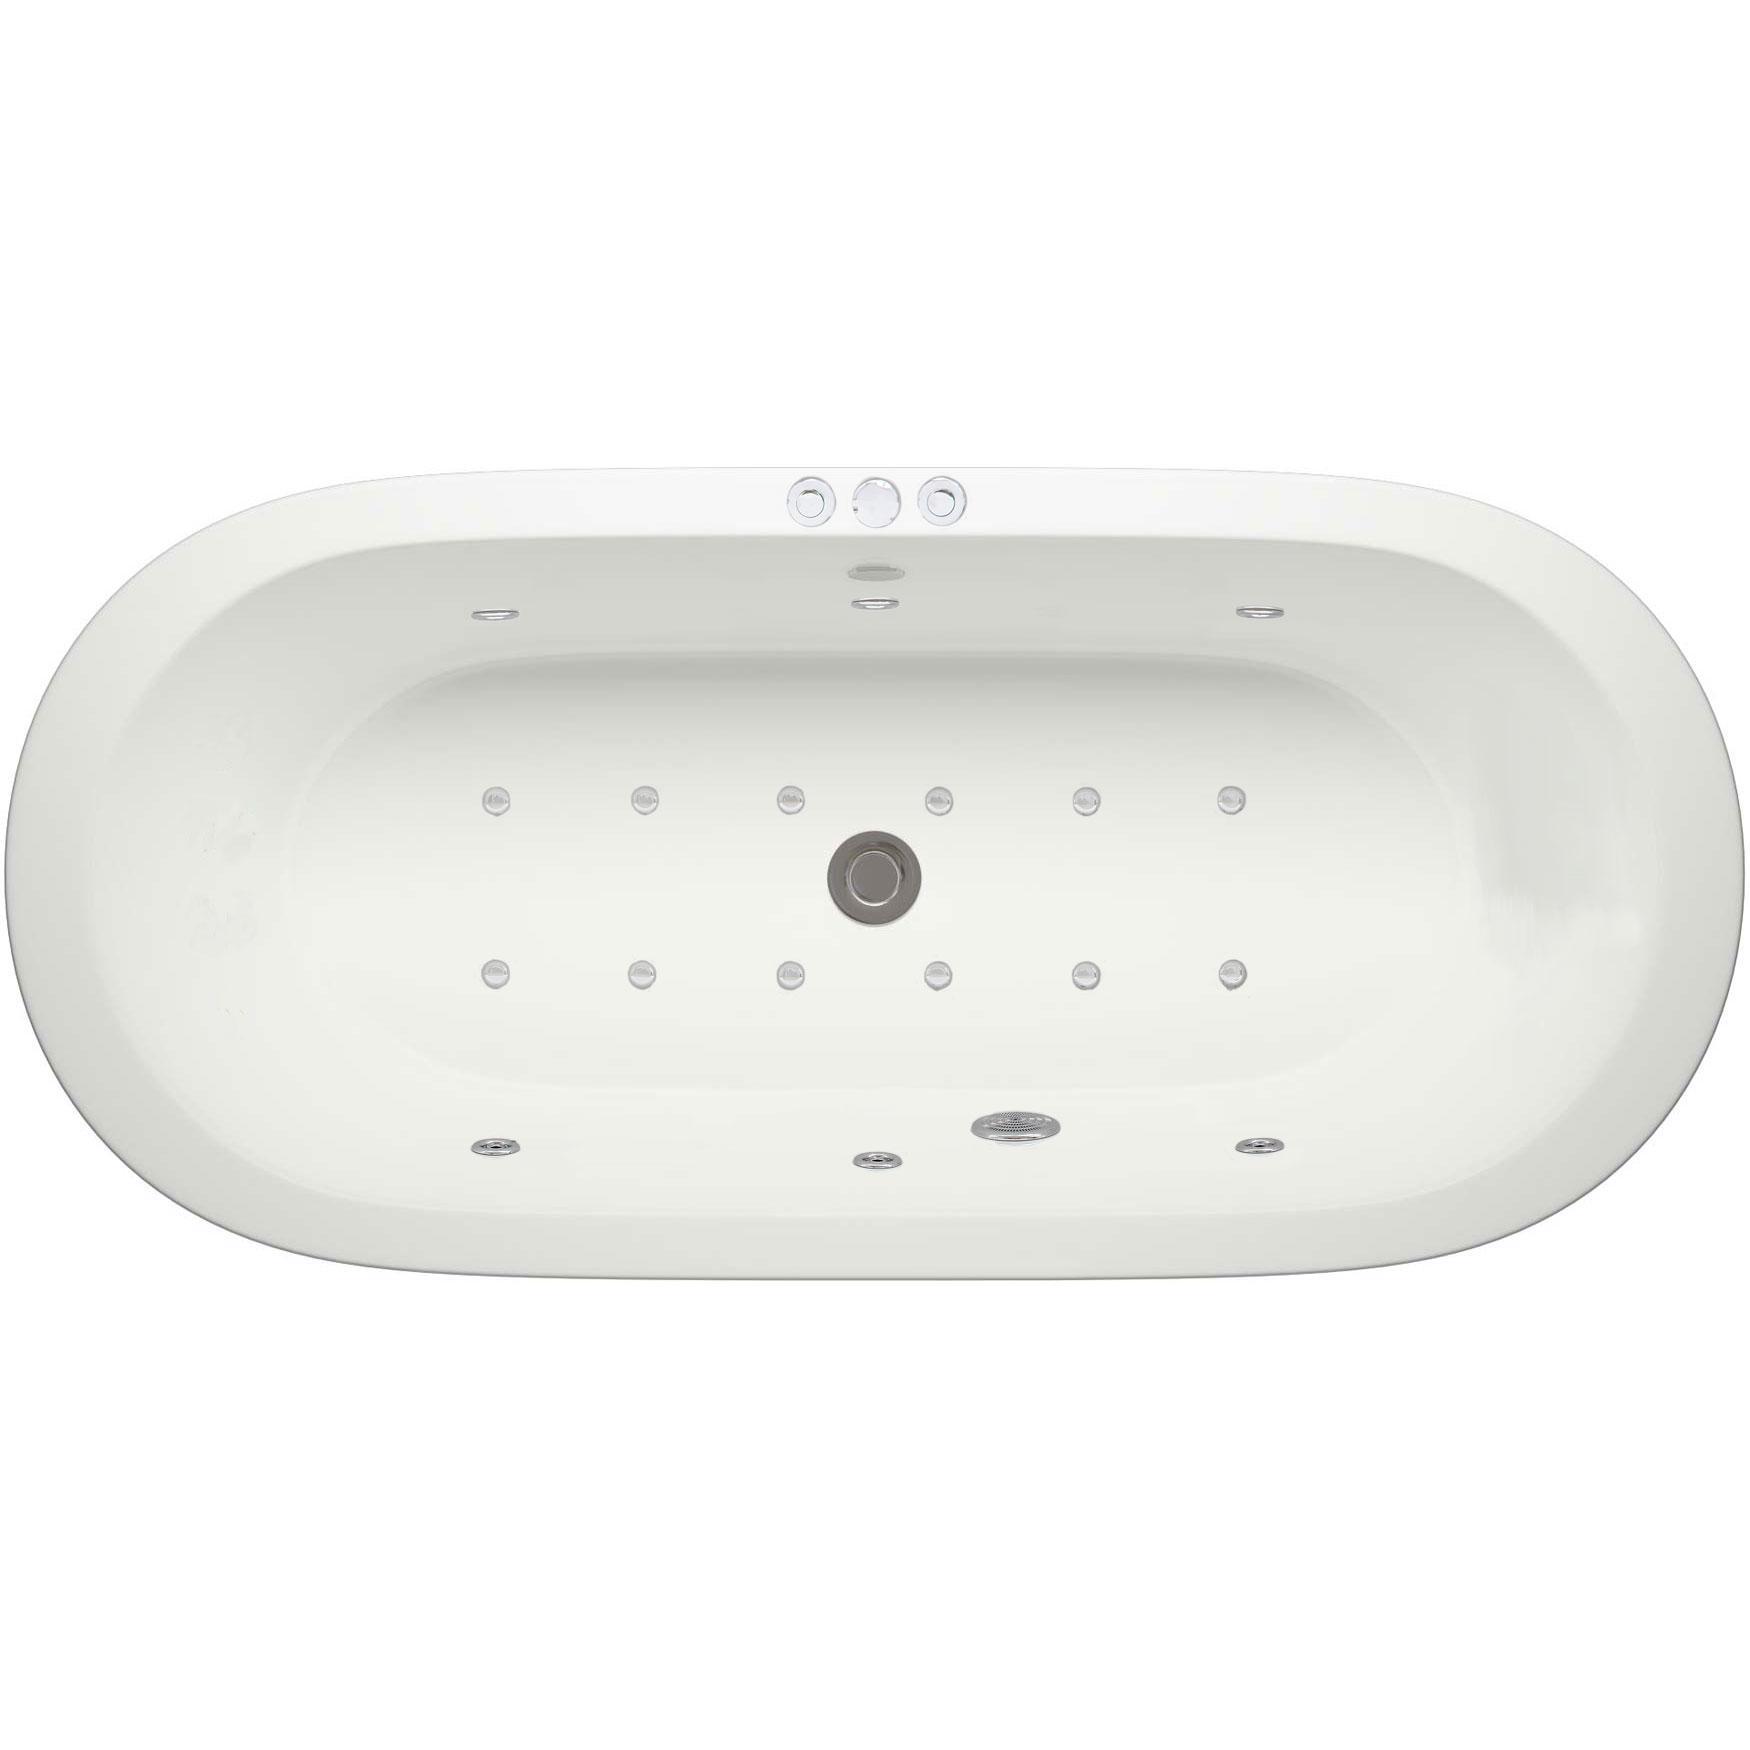 An image of Lisna Waters Curve 18 Jet Whirlpool Airspa Strand Freestanding Bath - 1700Mm X 8...